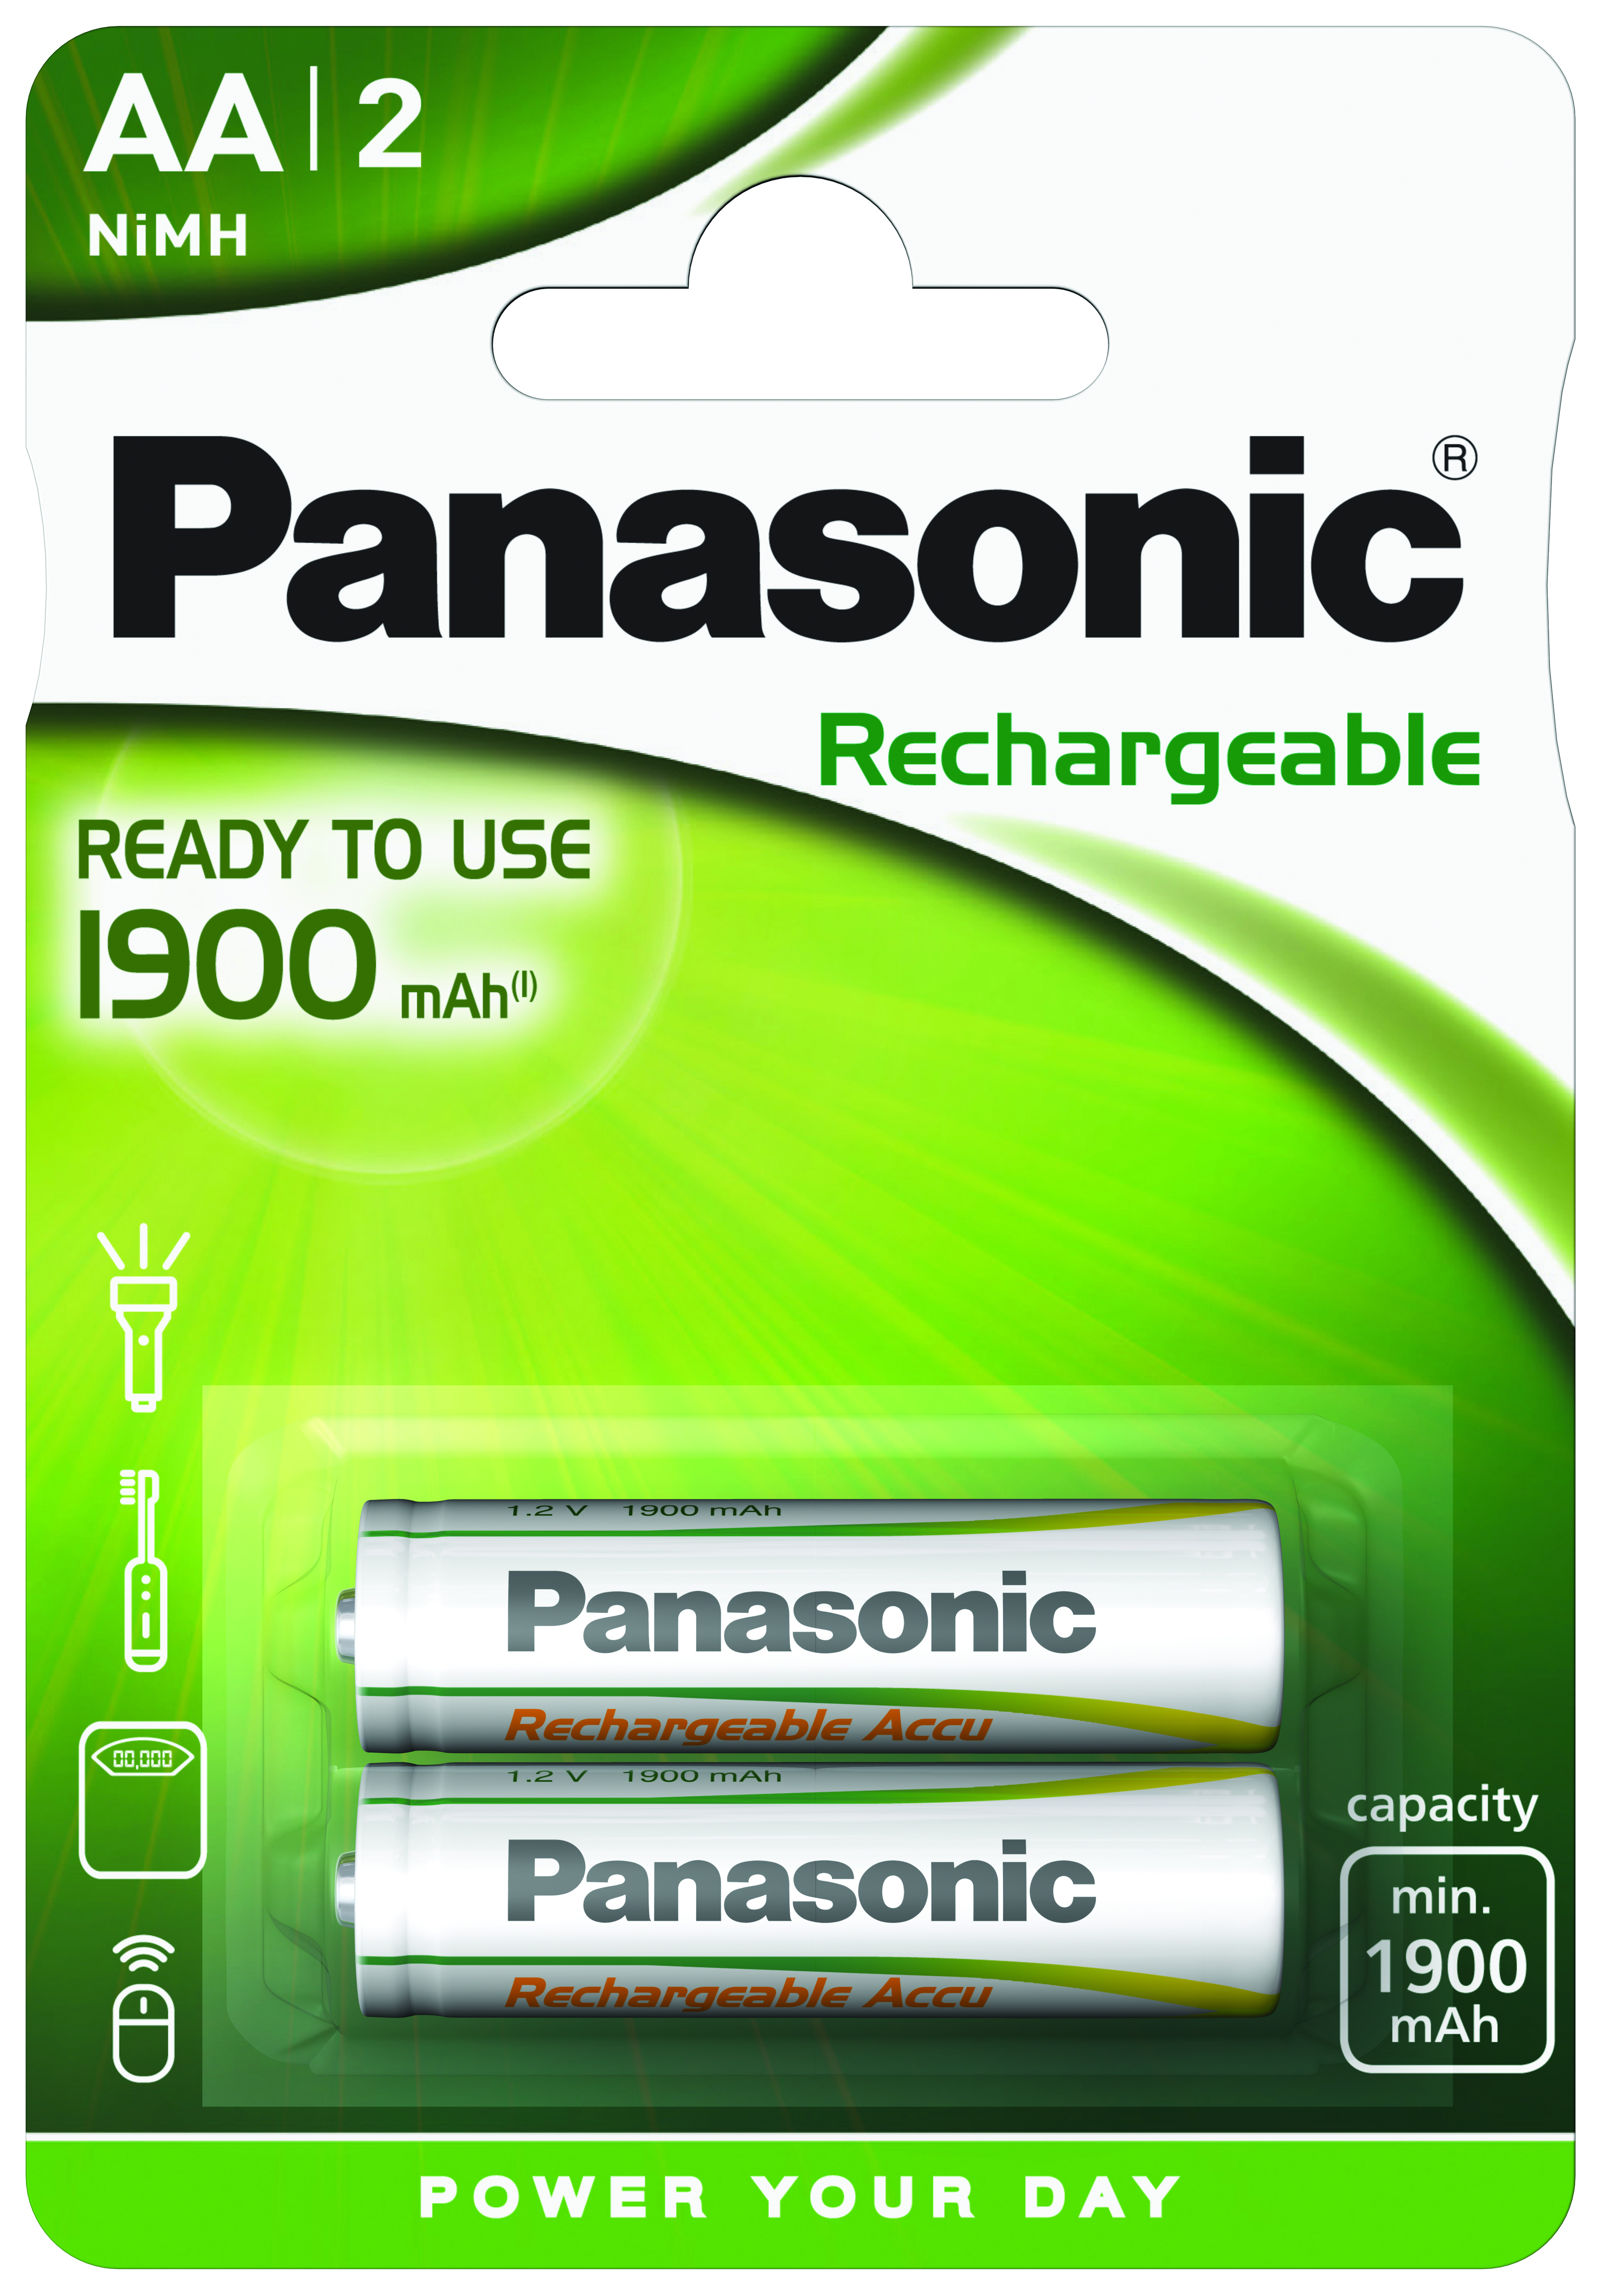 TRIUSO Batterie Panasonic Ready to Use rechargeable Mignon 2er Blister